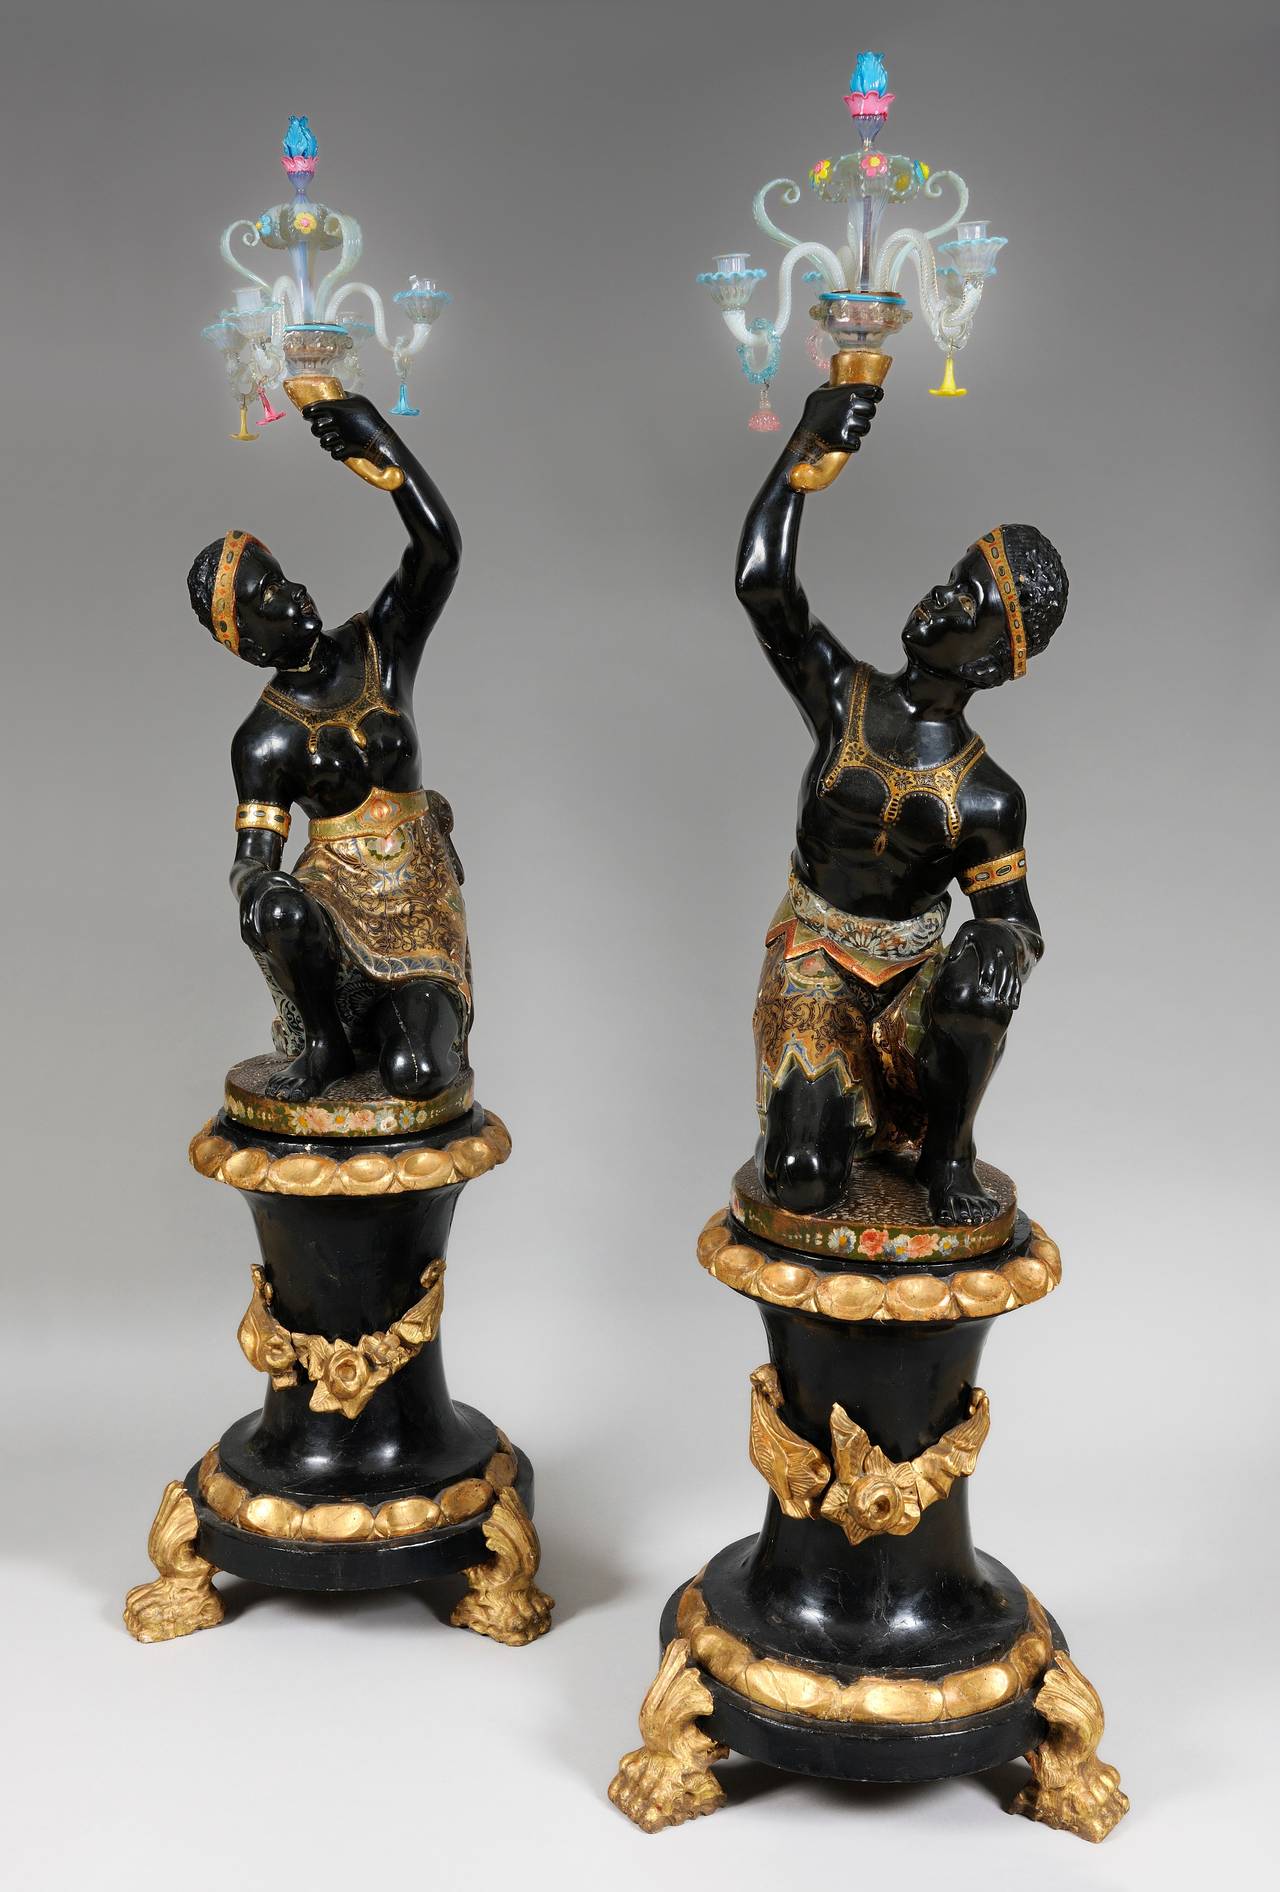 Pair of Venetian Nubian torcheres in painted and gilded wood with girandoles in Murano glass.

Italian work from the beginning of the 19th century.